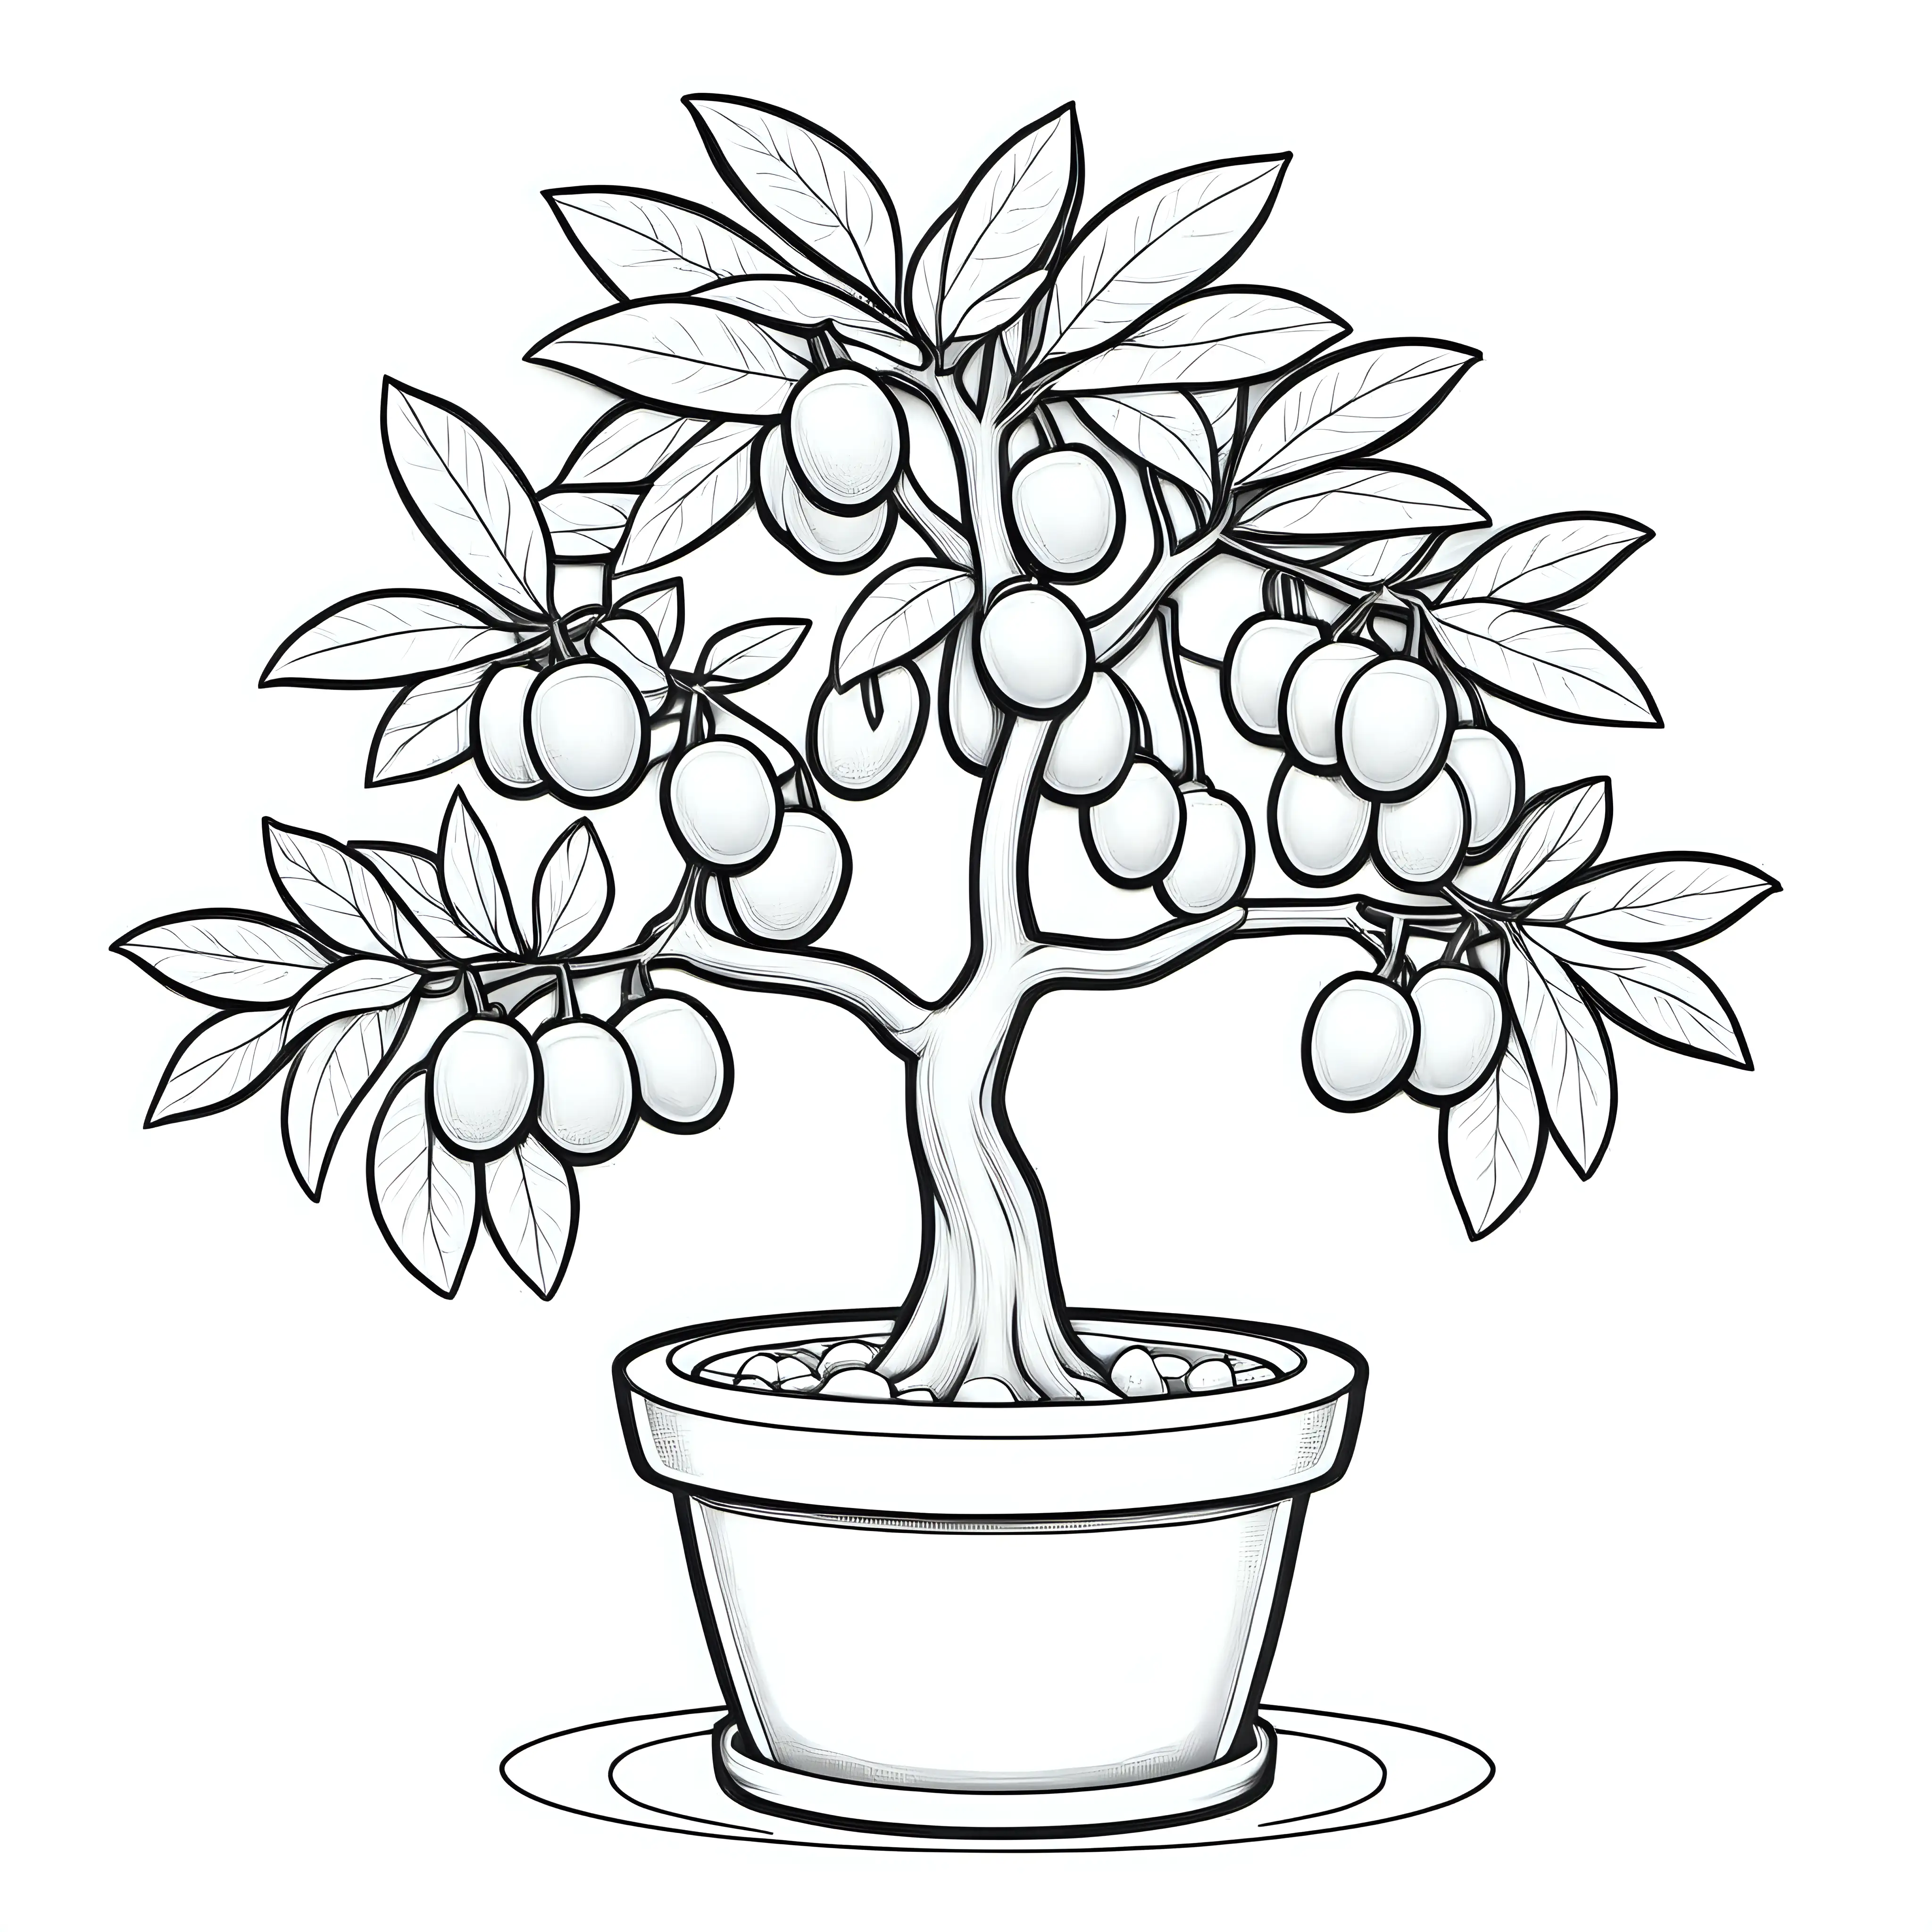 basic kids colouring book page, potted kumquat tree, lunar new year,  cartoon style, no shading, outline only for colouring, white background